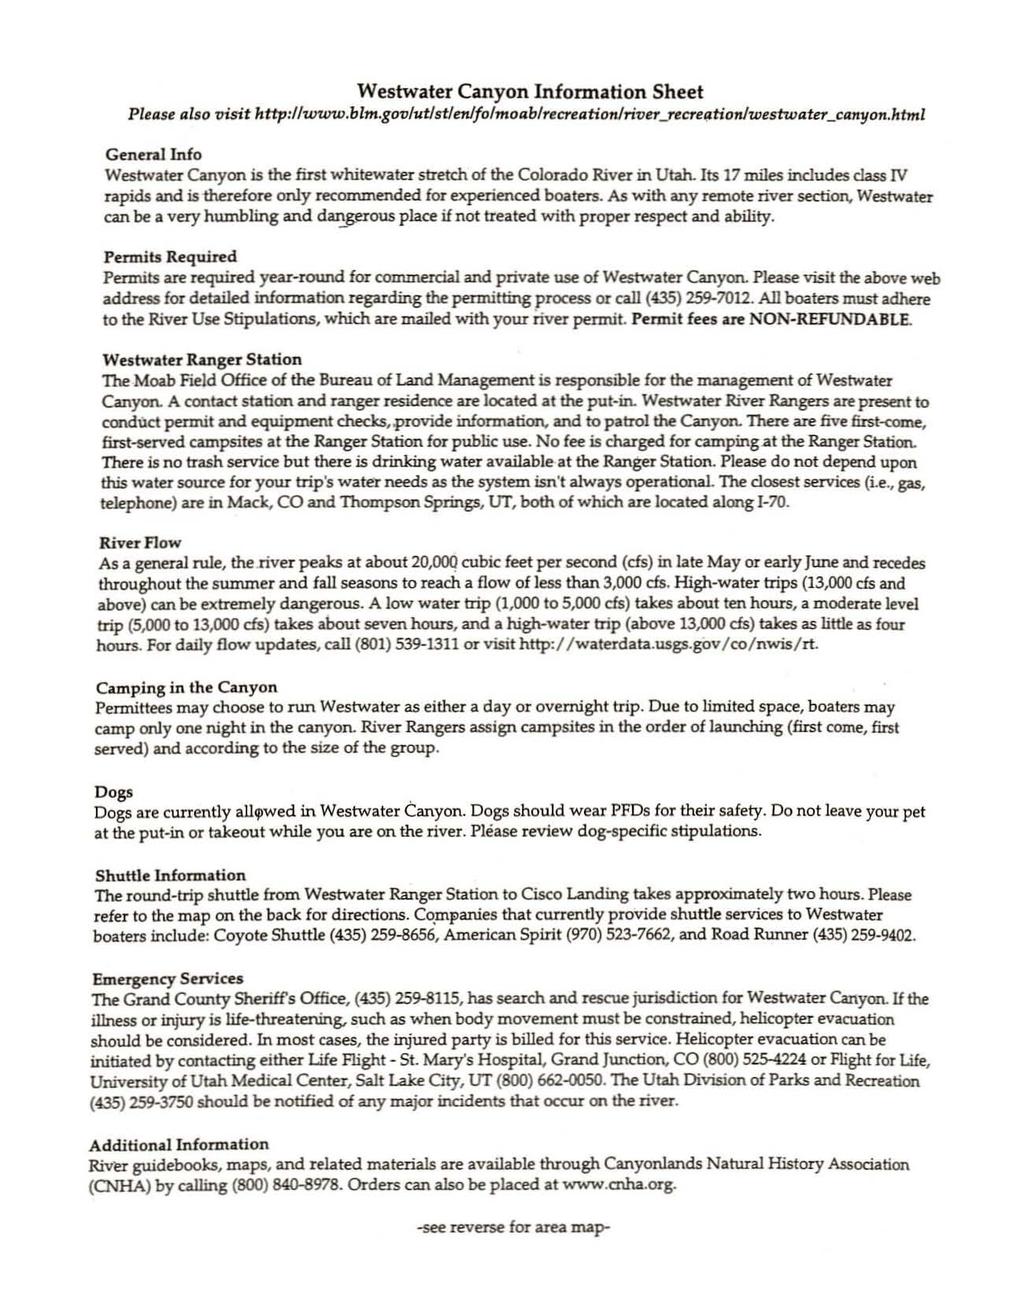 Westwater Canyon Information Sheet Pl~IlSf! also tlisit http://ujww.blm,gotjlutjst/mjlolmoab/rf!crf!q.tion/river_tf!cre~tionlwestwater3anyon.